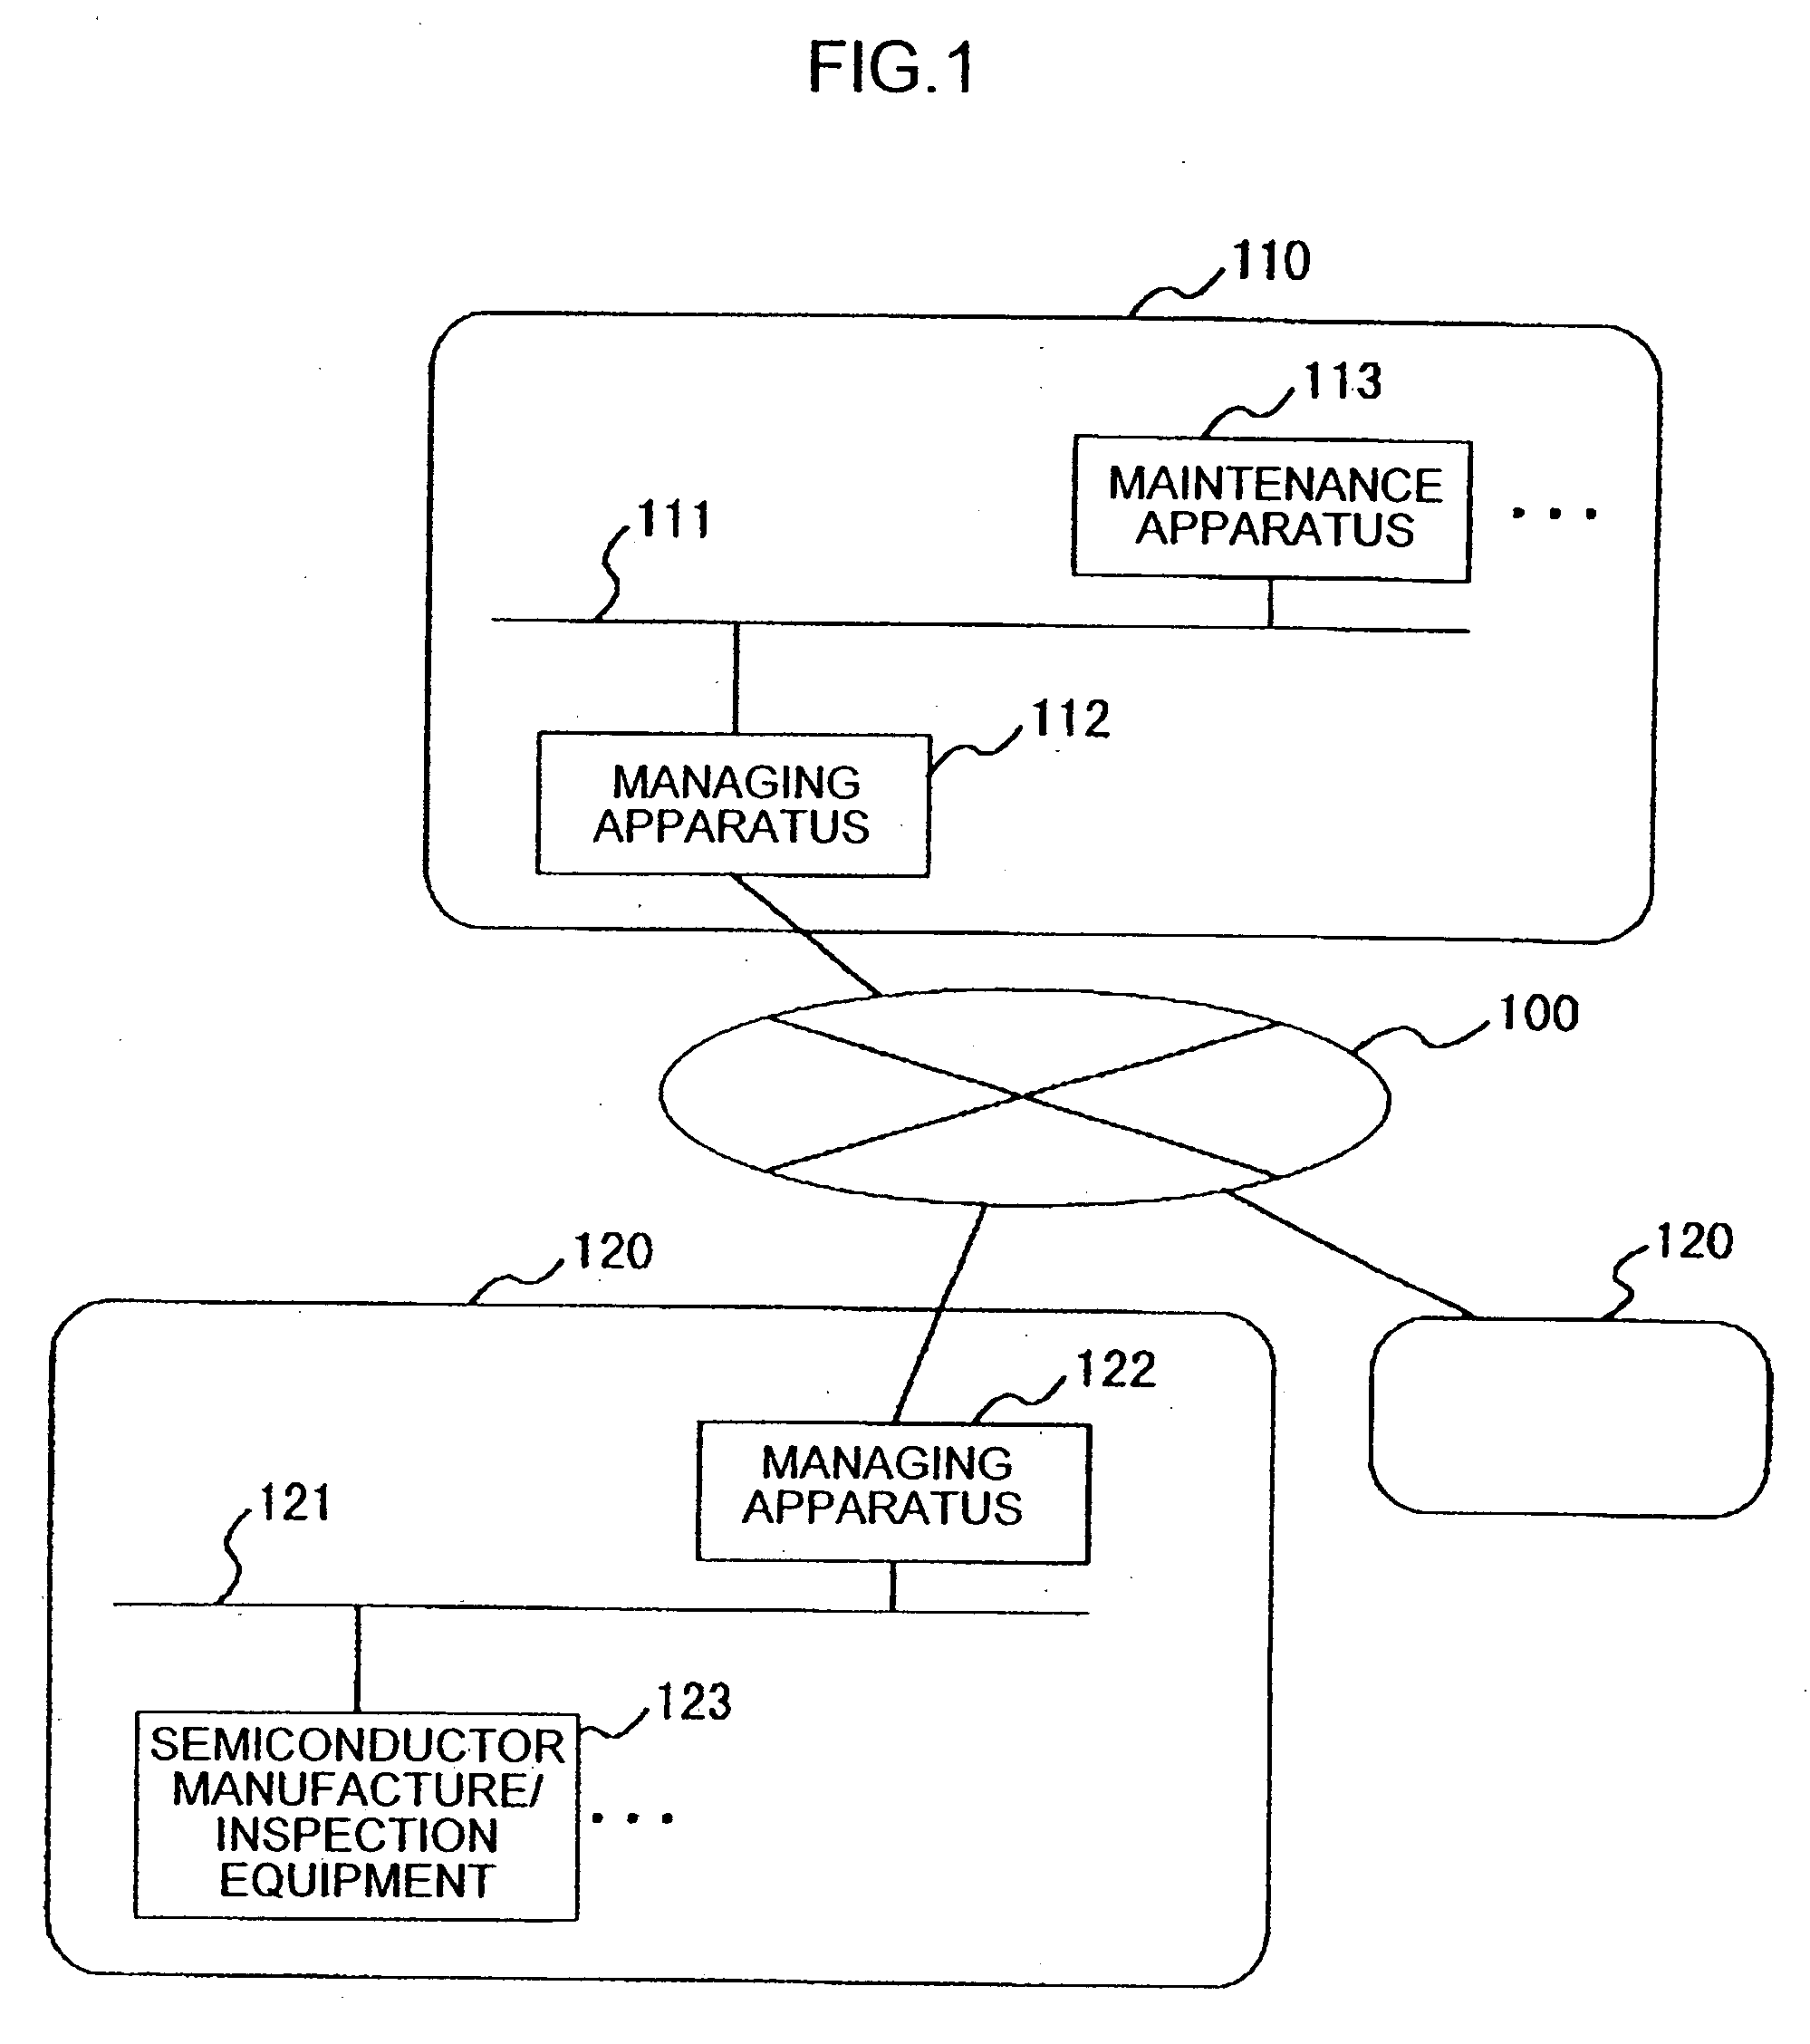 System and method for on-line diagnostics